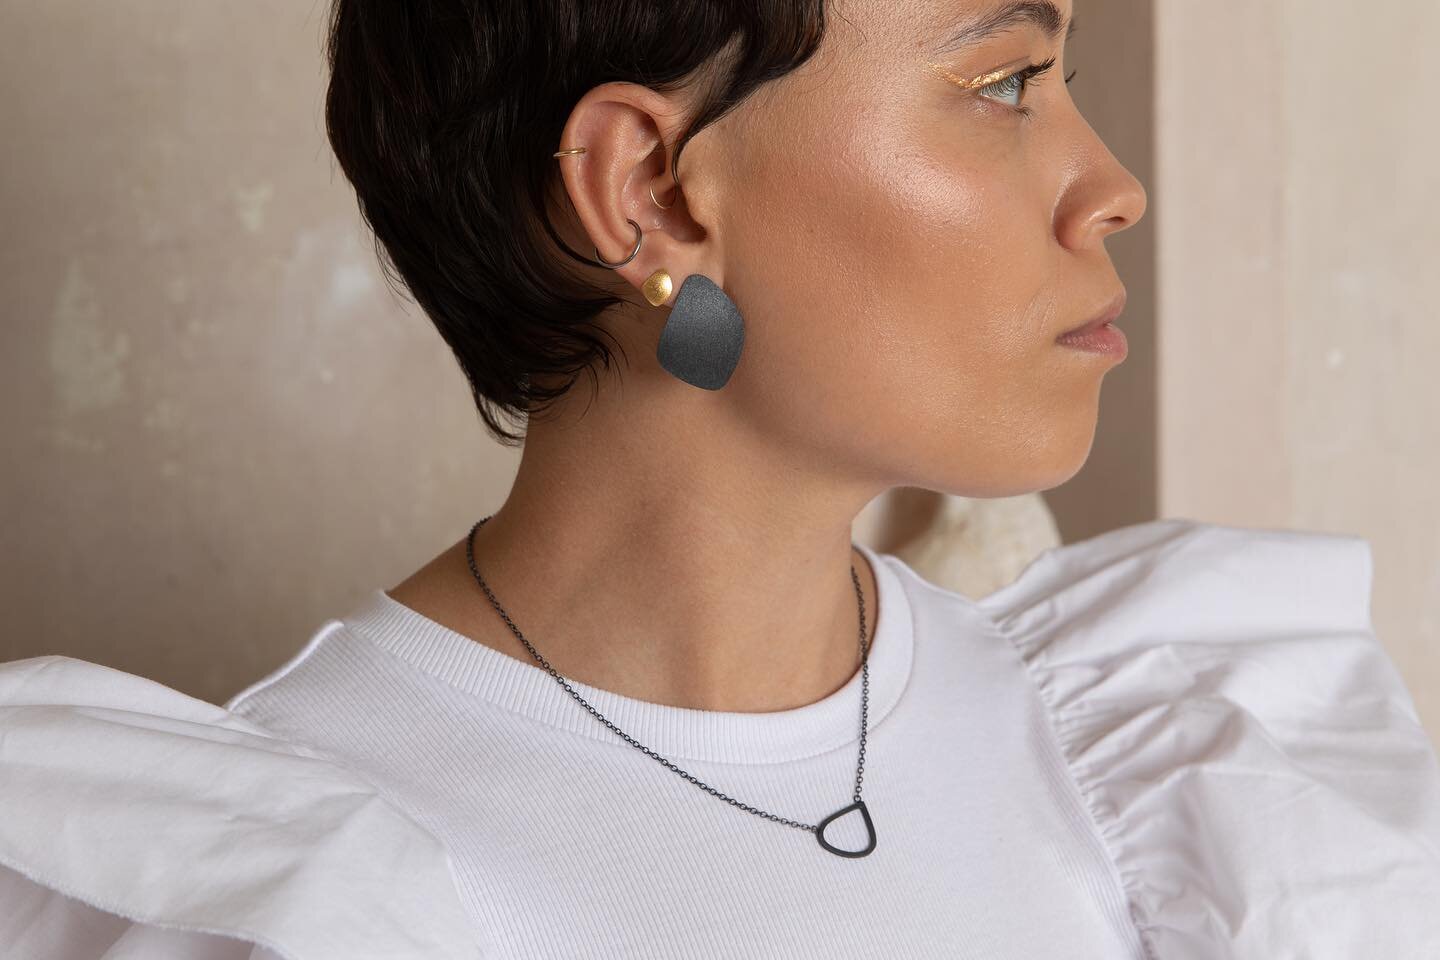 Freeform wing stud earrings in oxidised silver and 24ct gold vermeil. Gorgeous contrast of colour and oxidised medium wing necklace to finish the look. Available from my website link in bio. 

Model - @_siobhancorbin 
Photography - @lids_harper 
MUA 